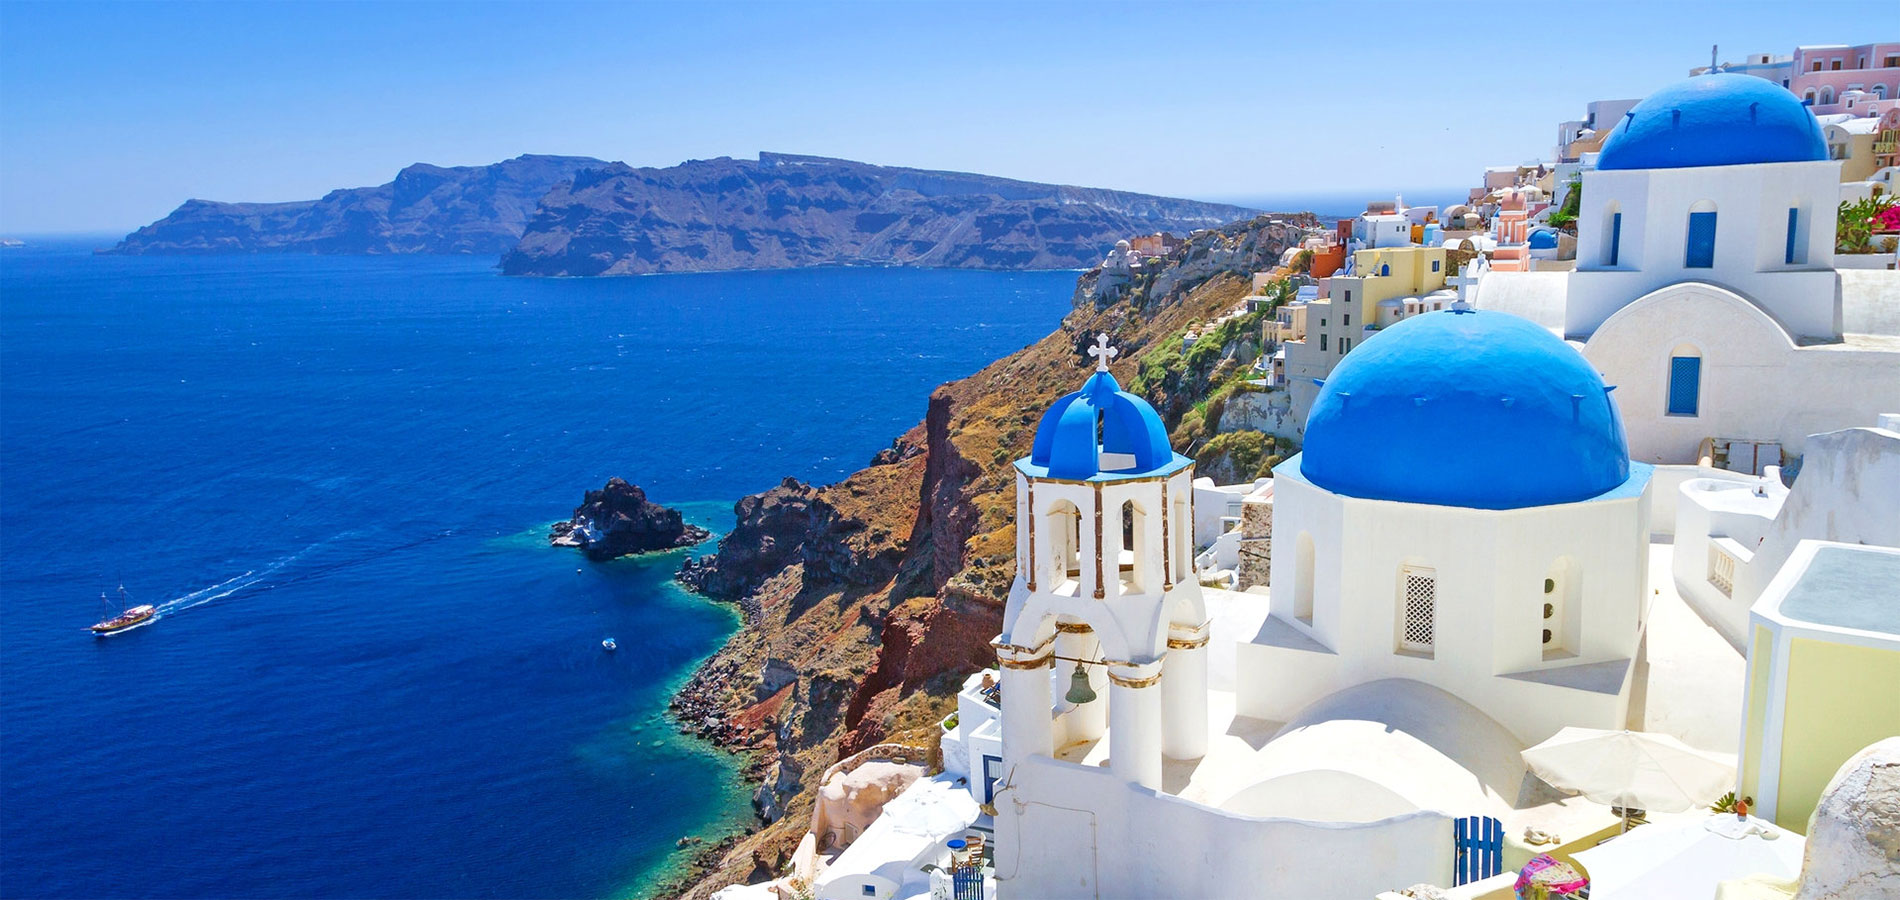 Contact with Nobility tours at Santorini